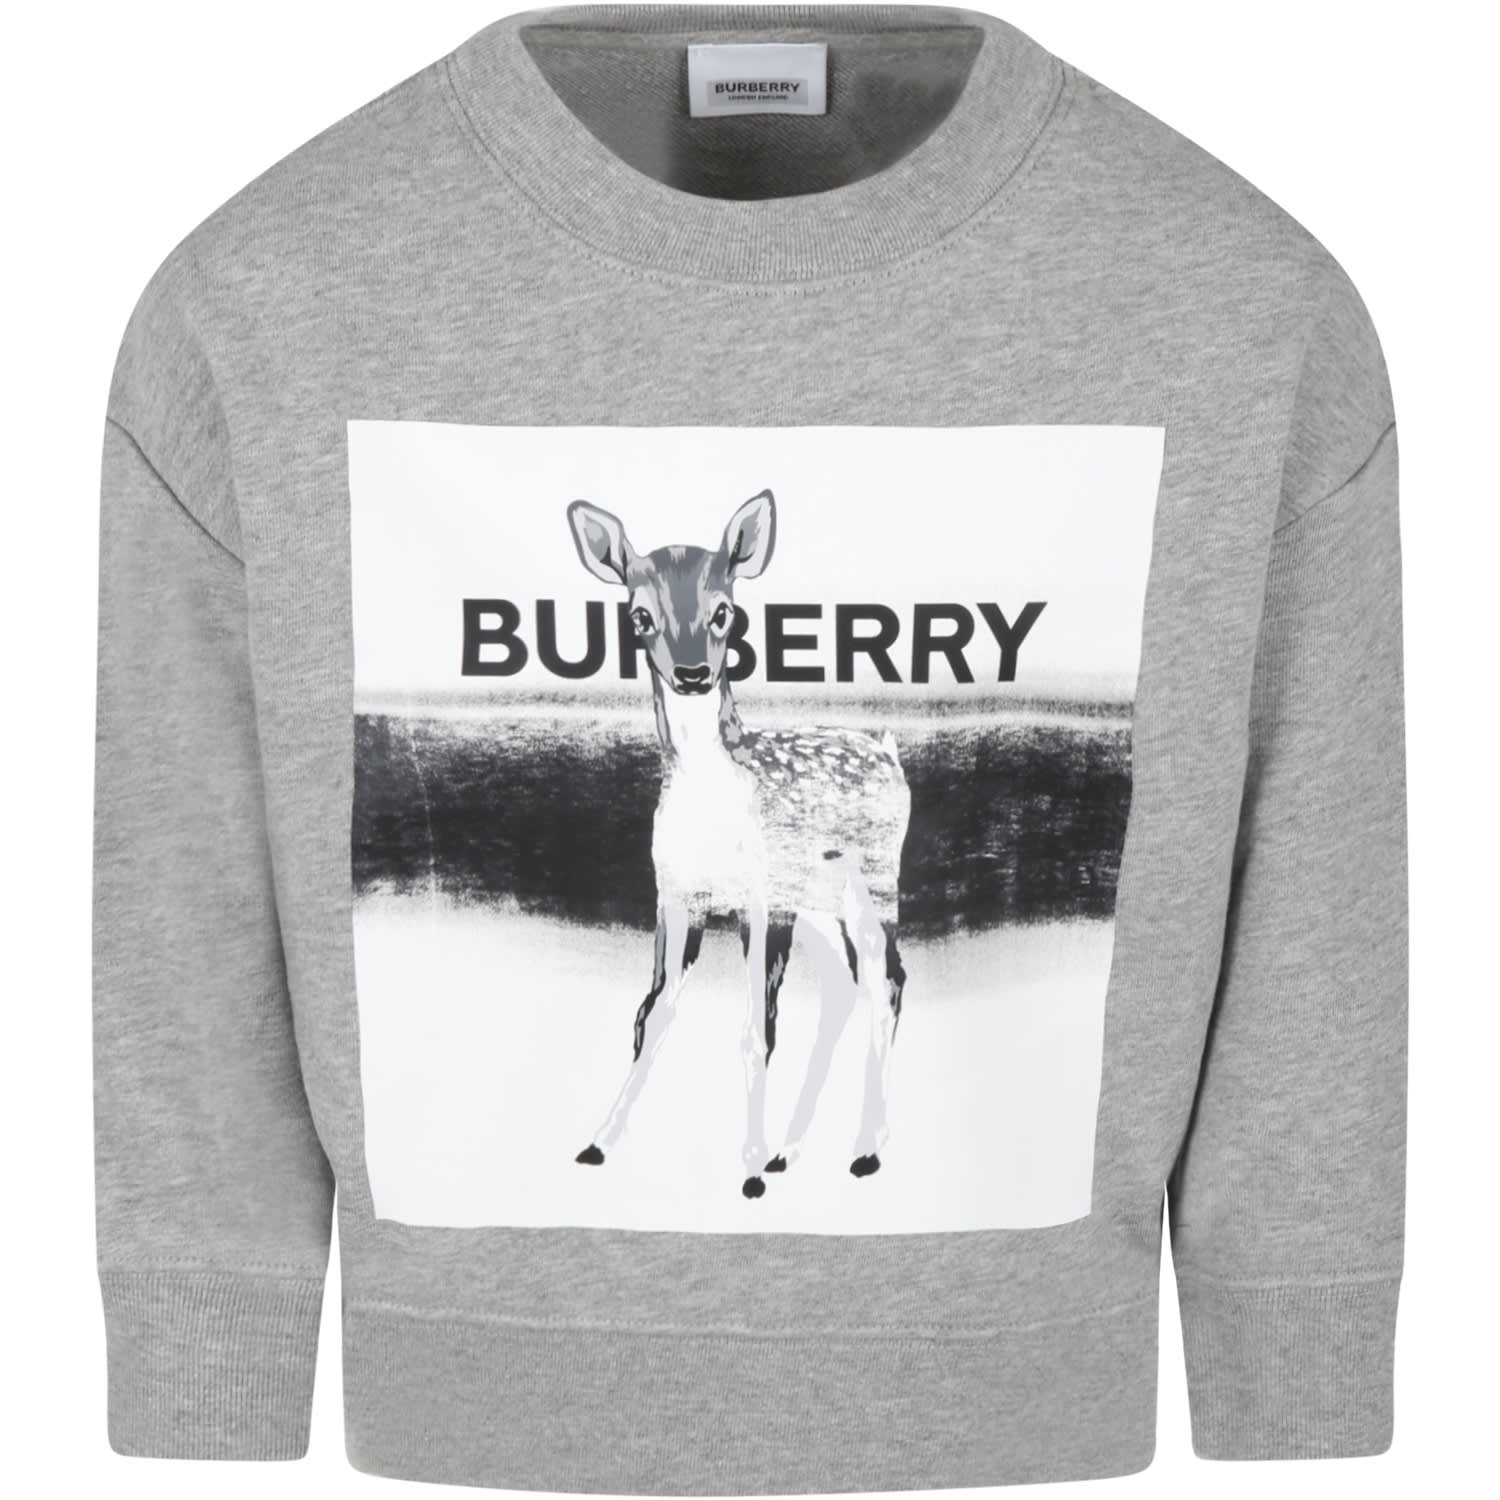 Burberry Grey Sweatshirt For Kids With Fawn